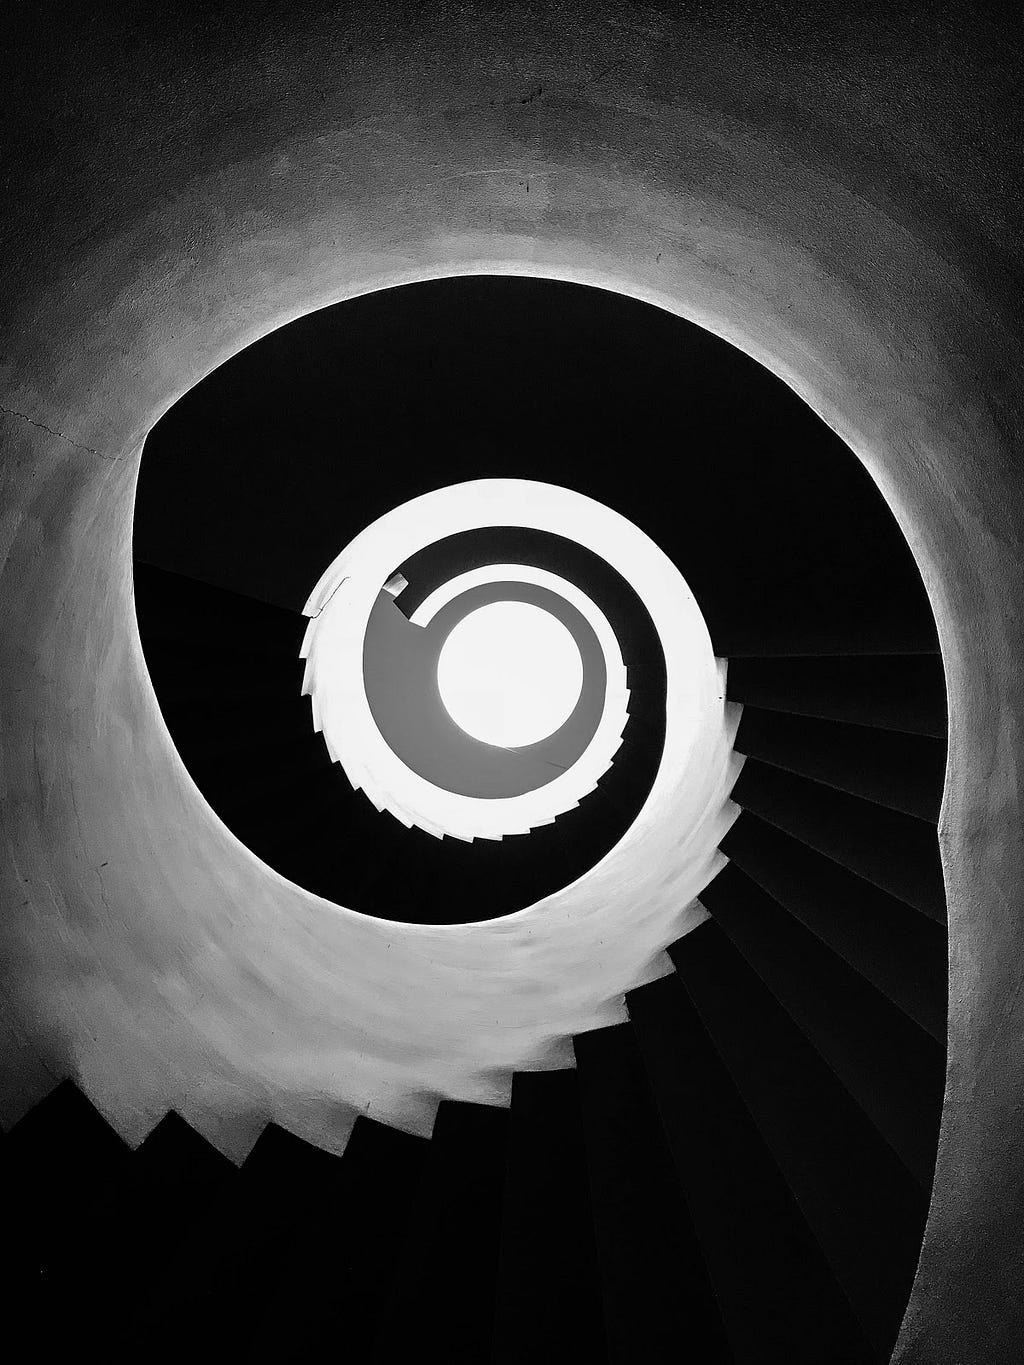 Optical illusion image looking down a spiral staircase